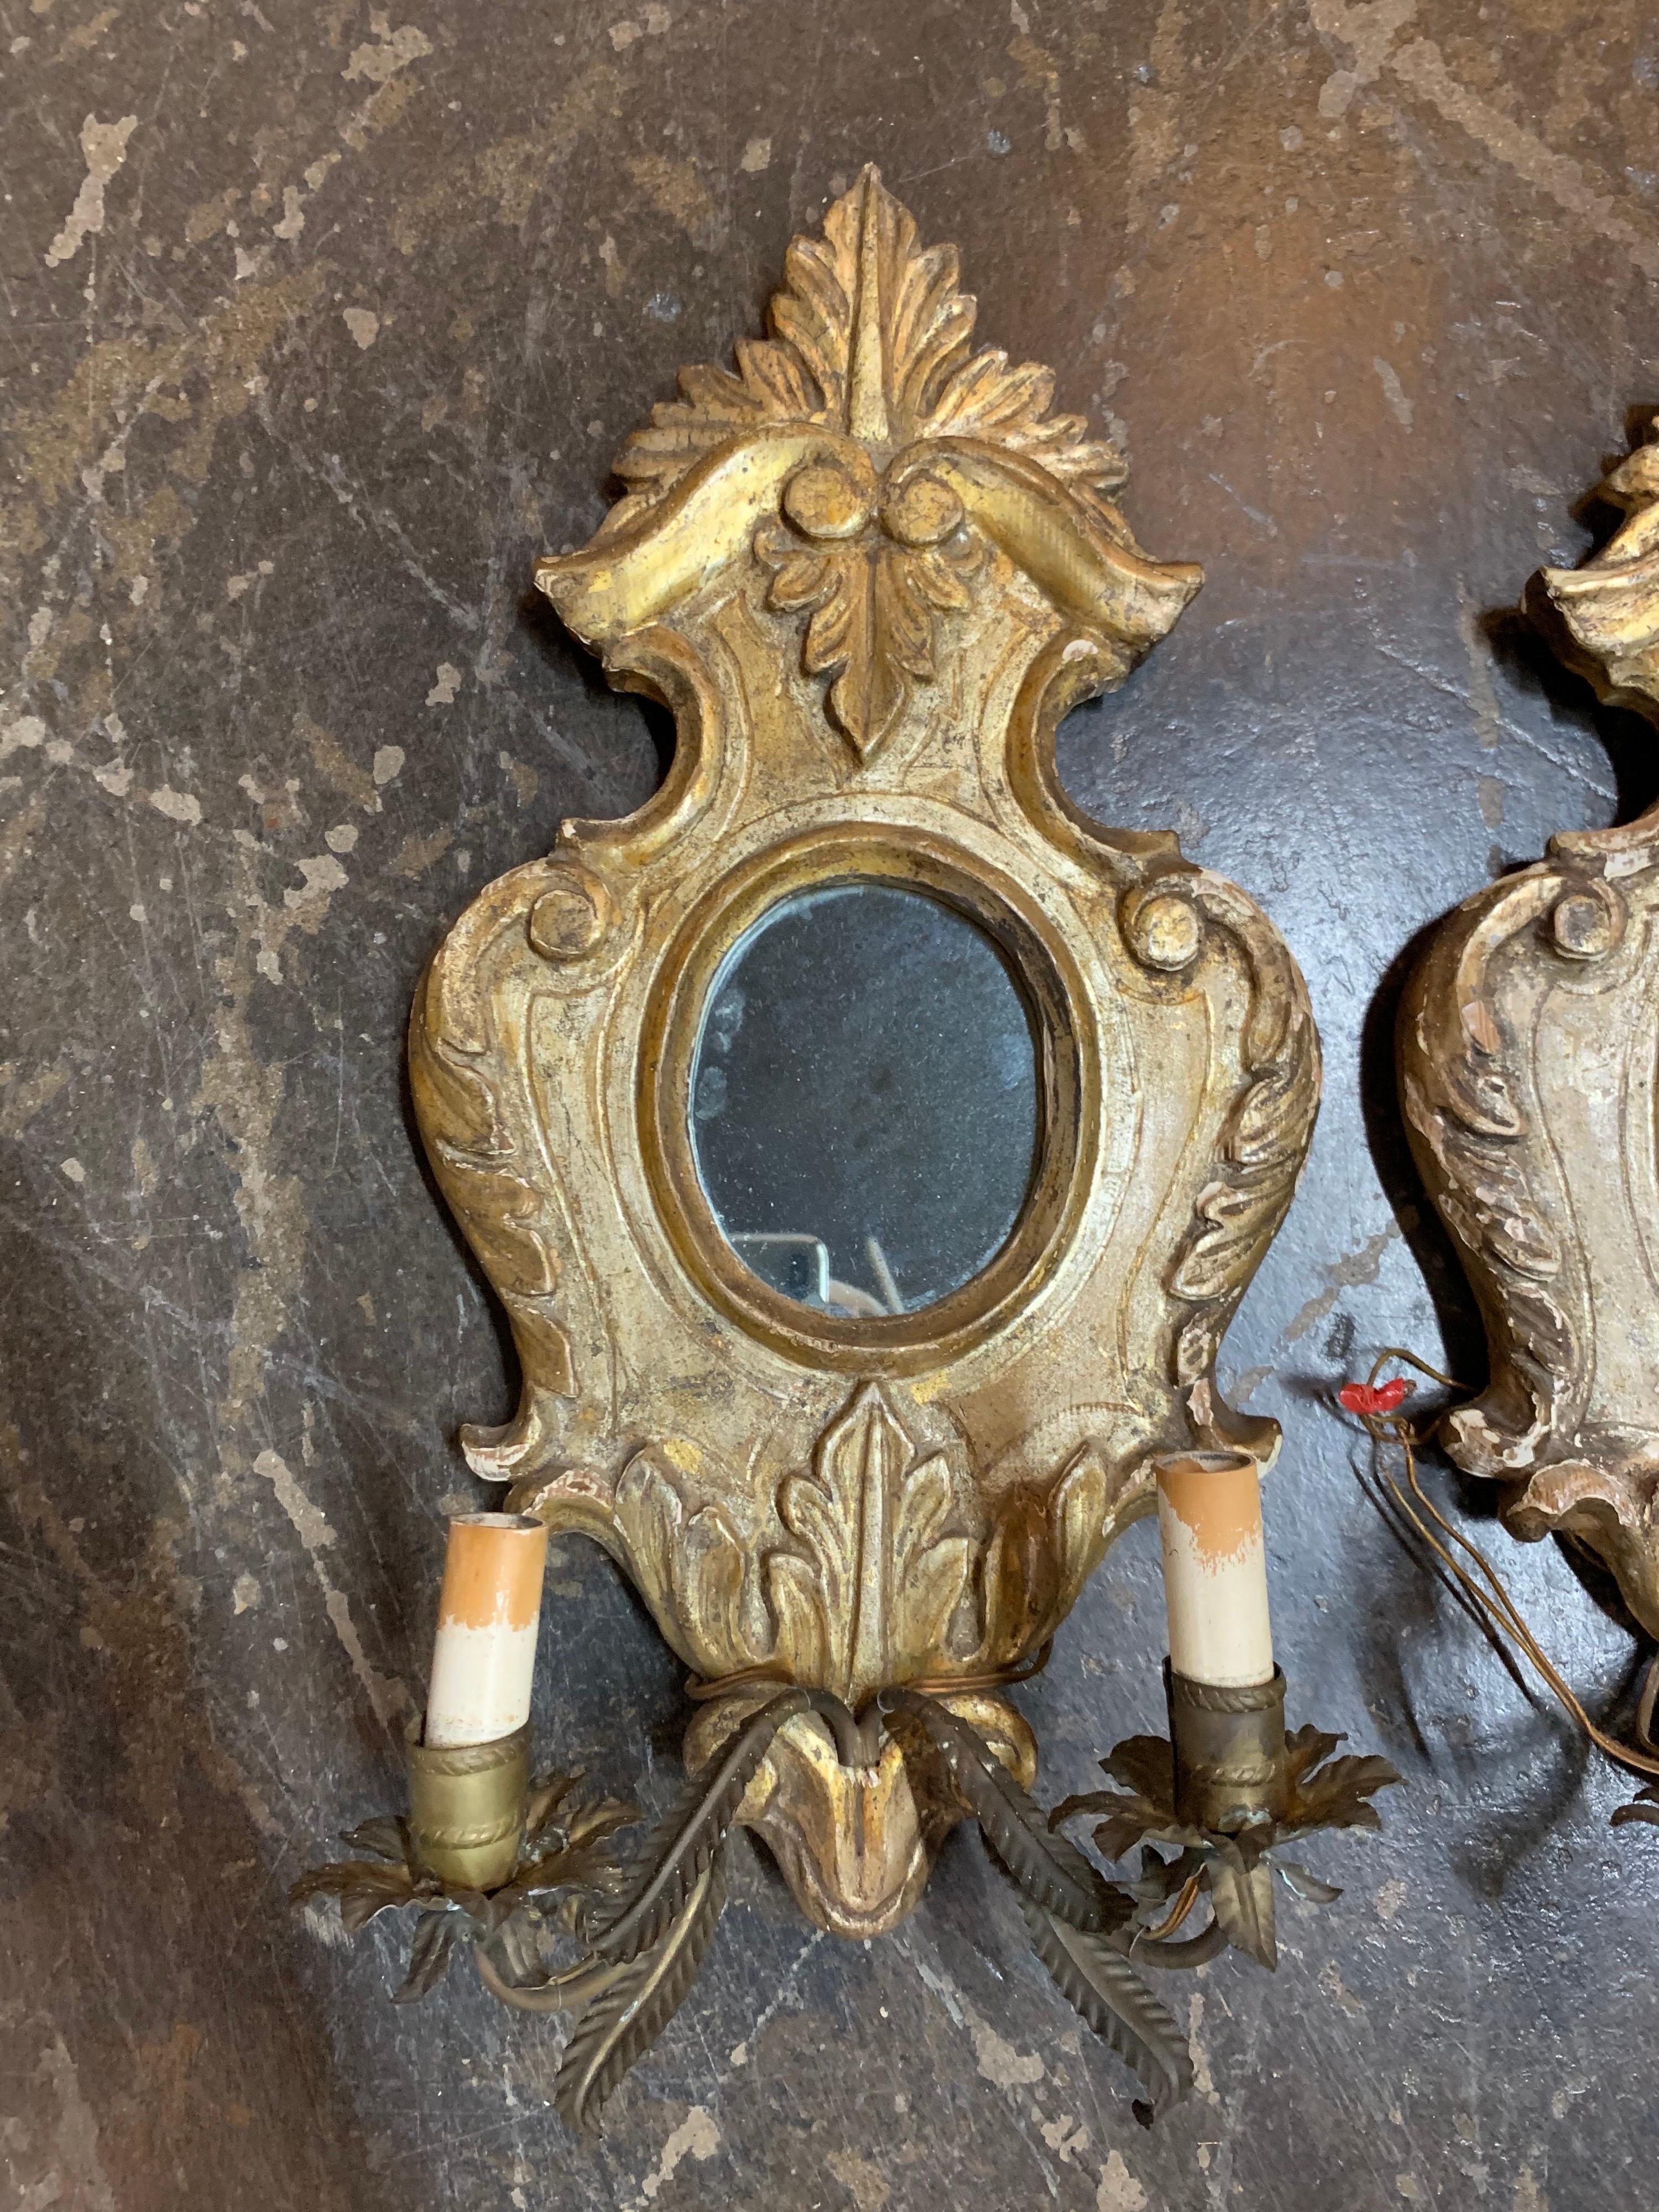 Decorative pair of the 18th century Italian carved and giltwood wall sconces with 2 lights. Nice carving on the giltwood and there is a mirror in the center of the sconces.
These would be a lovely focal point in a beautiful room!